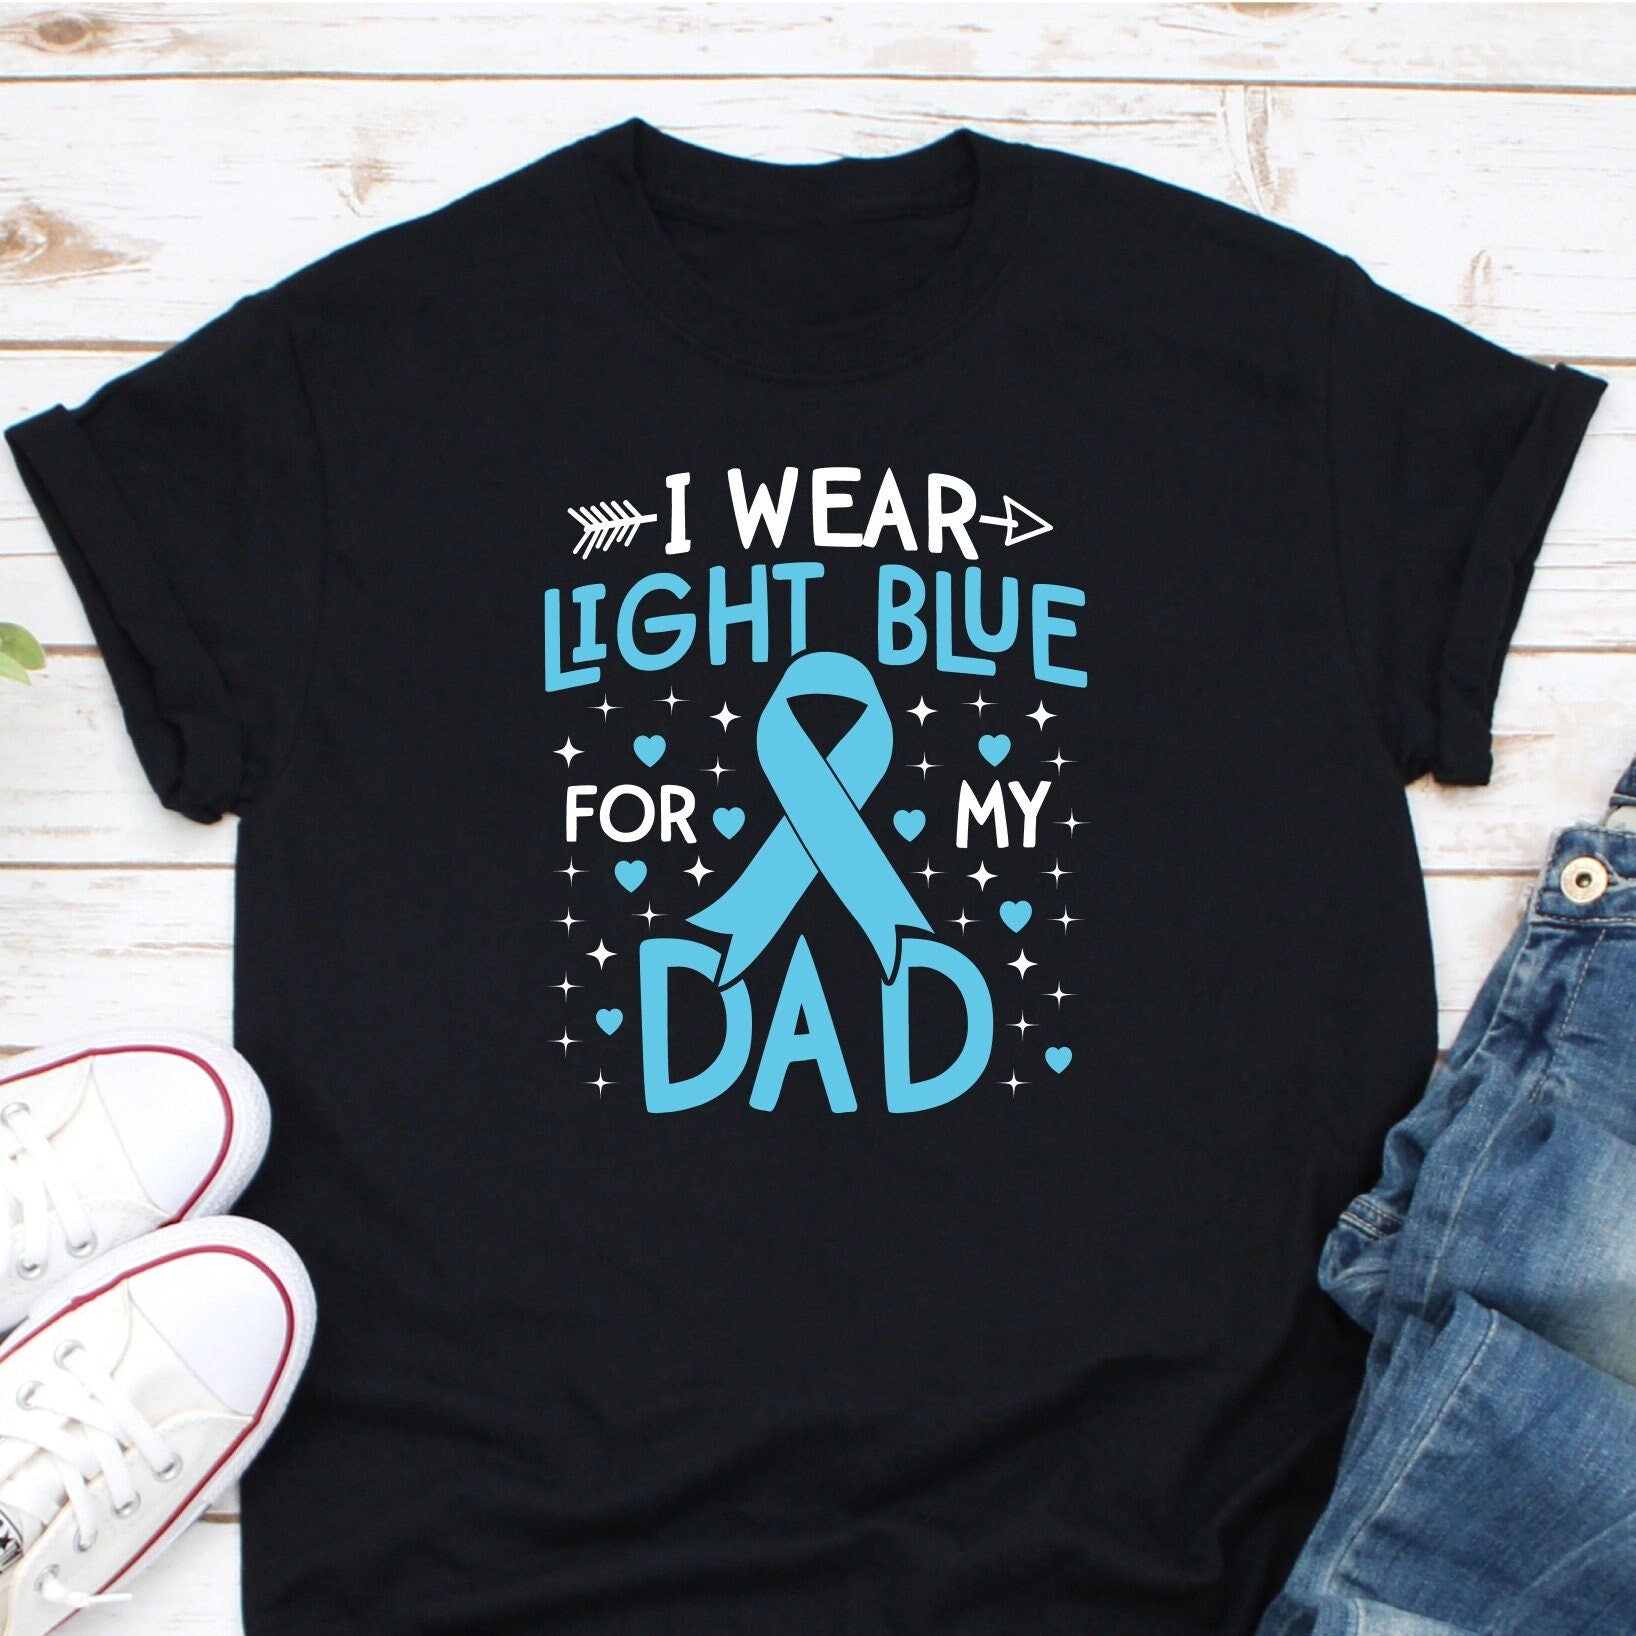 I Wear Light Blue For My Dad Shirt, Prostate Cancer Shirt, Prostate Cancer Awareness Shirt, Blue Ribbon Gift